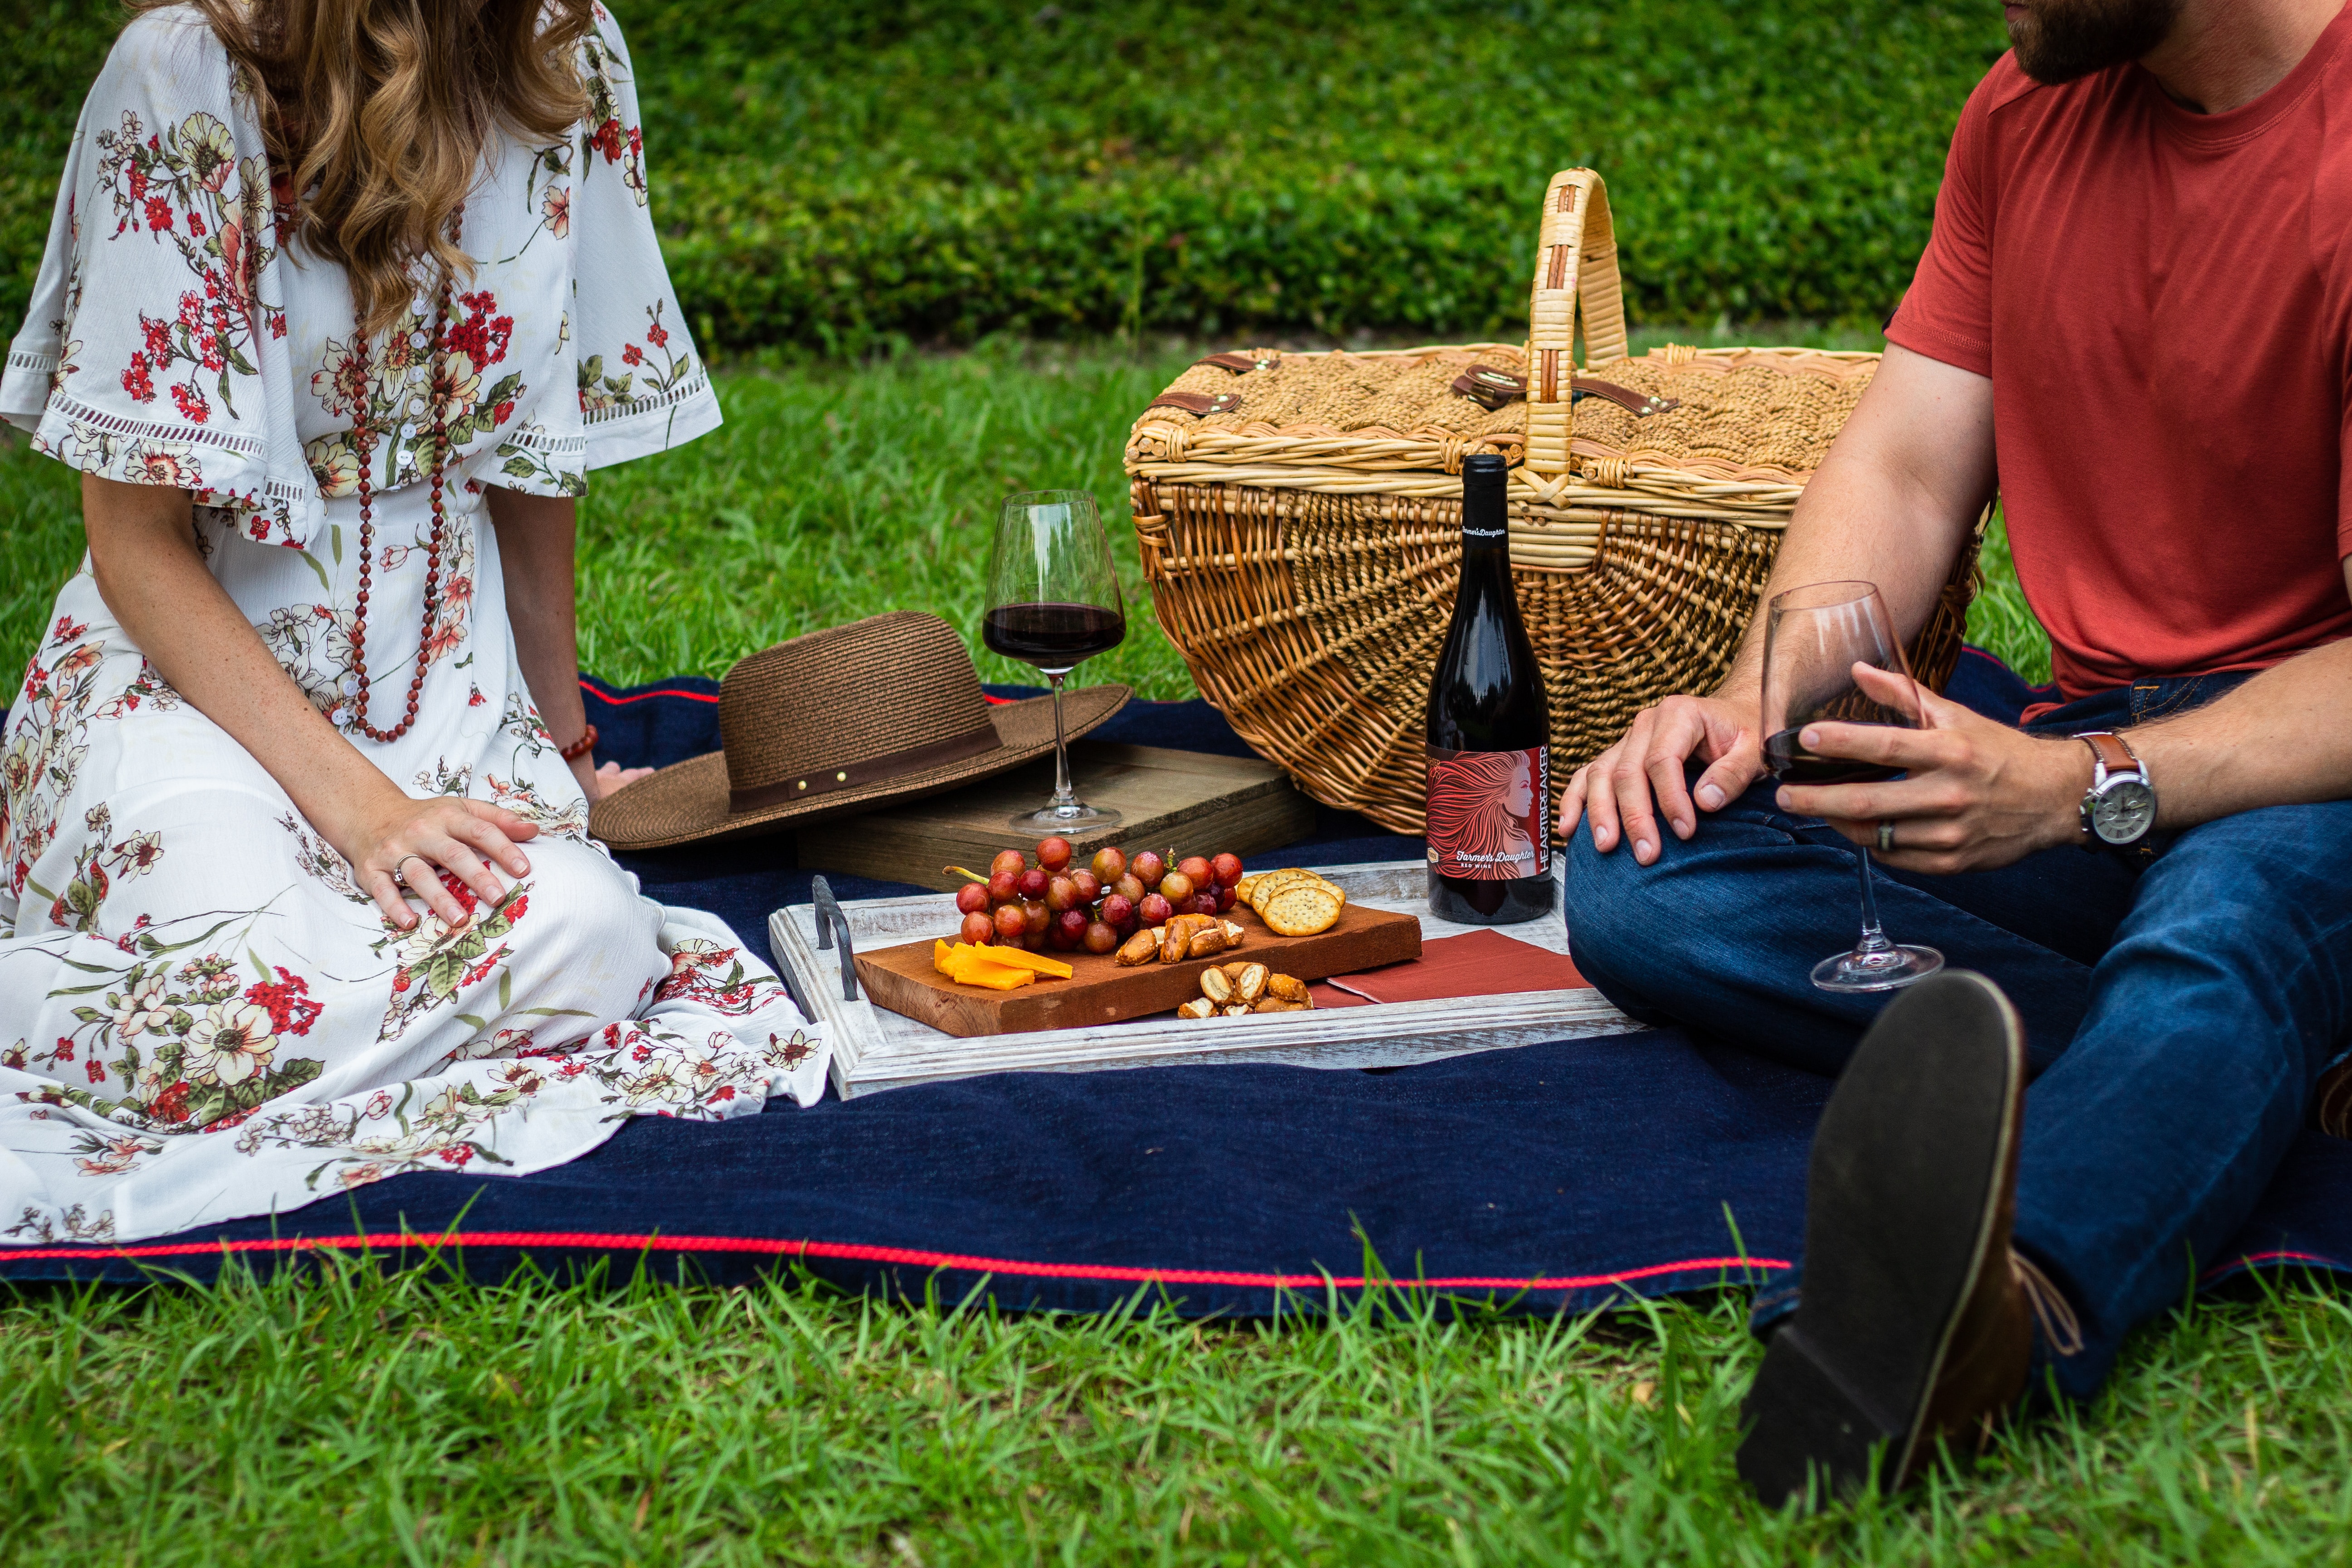 A picnic is a beautiful way to treat your Valentine!